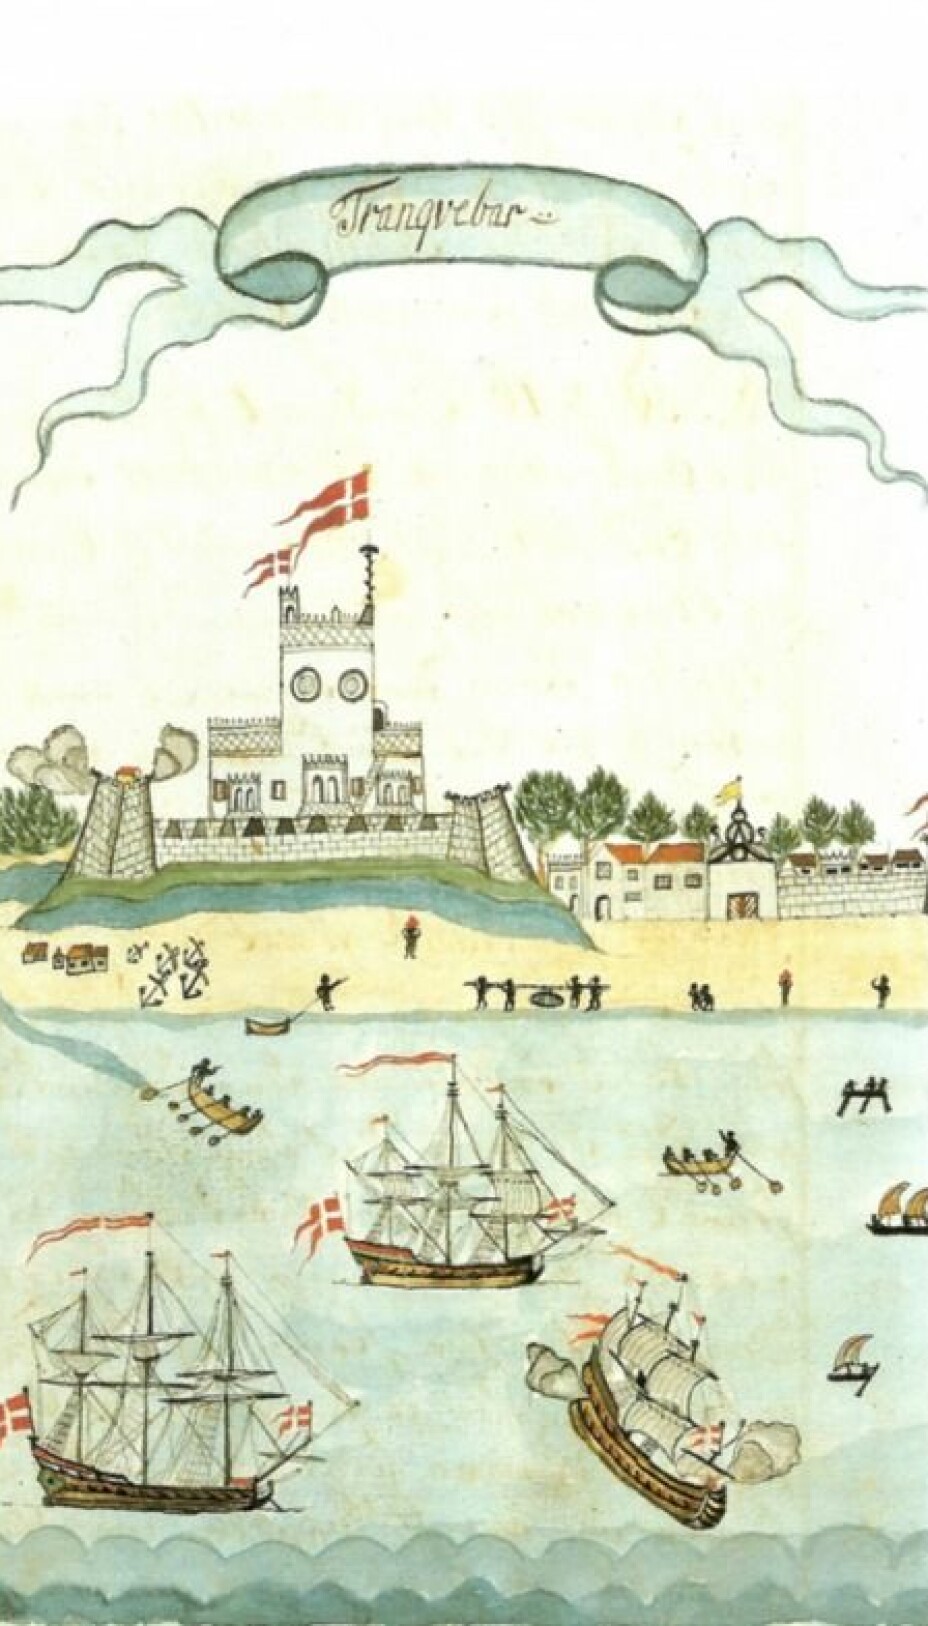 Tranquebar in 1723. The town had no port, and all transport to and from land had to be done by Indian rowing boats. The fortress of Dansborg rises above the town, and on the right, in the town wall, the seaport into the town can be seen. The drawing is from First Officer Schmidt's travel diary on board the ship Queen Anna Sophia.